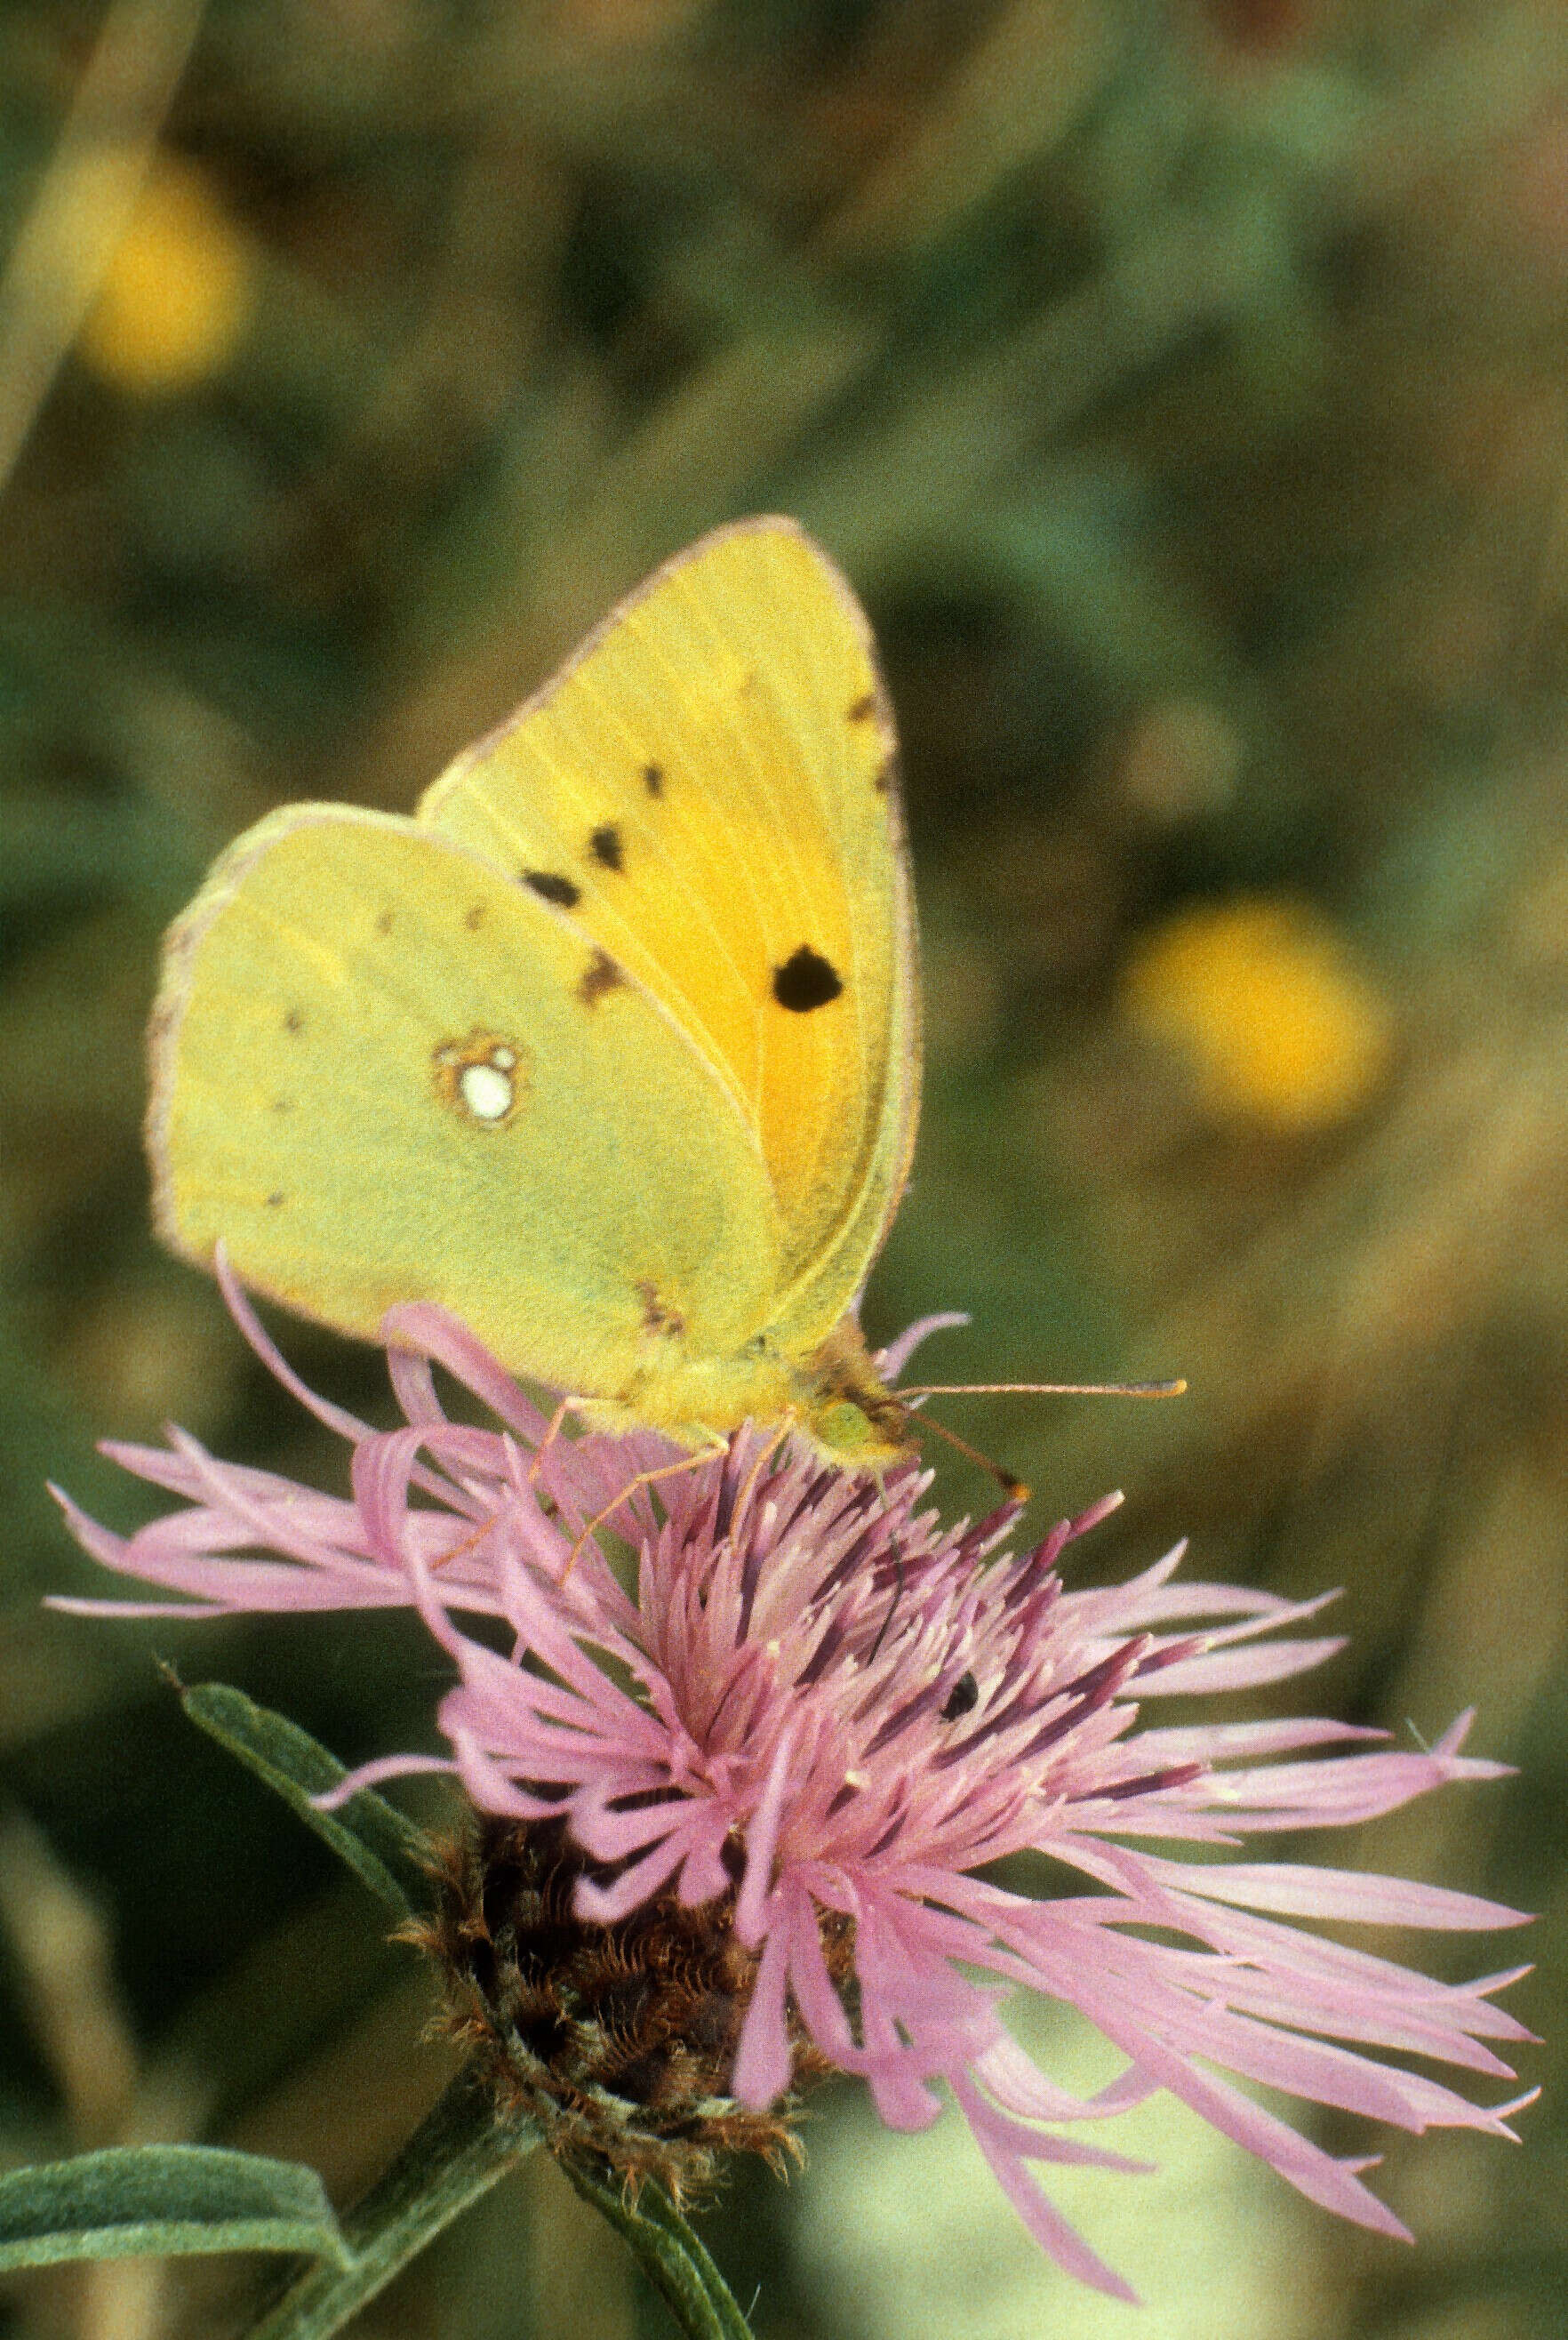 The major surprise of 1998 were three separate sightings of the less common migrant Clouded Yellow.